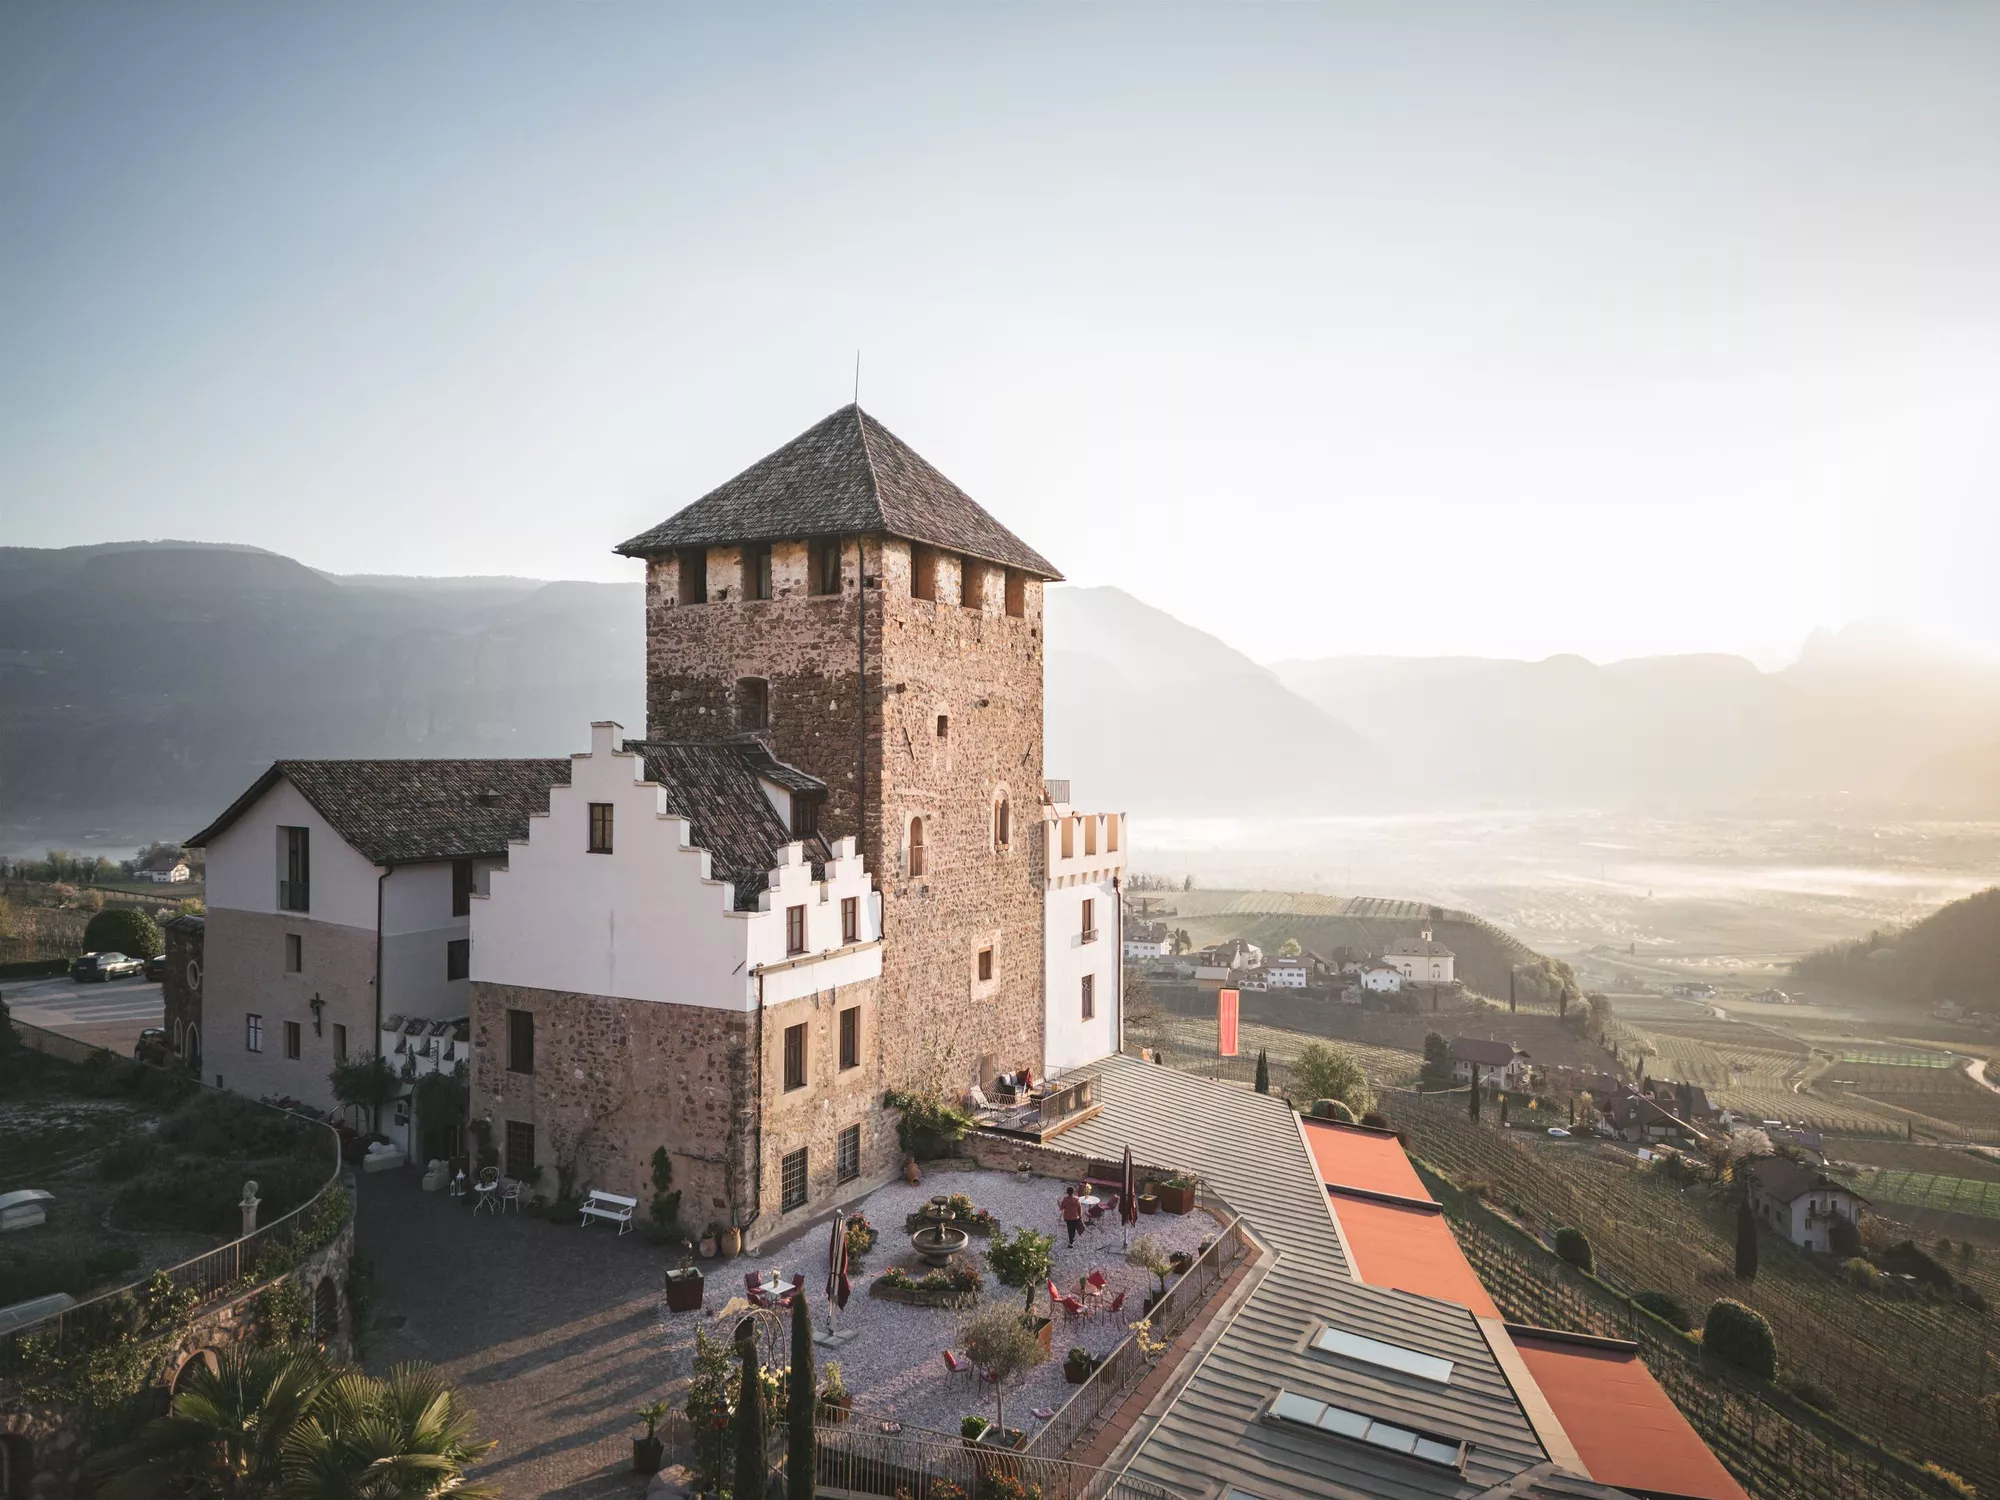 View of Schloss Hotel Korb in Missian, South Tyrol, and the countryside at its feet (c) photo Koni Studios